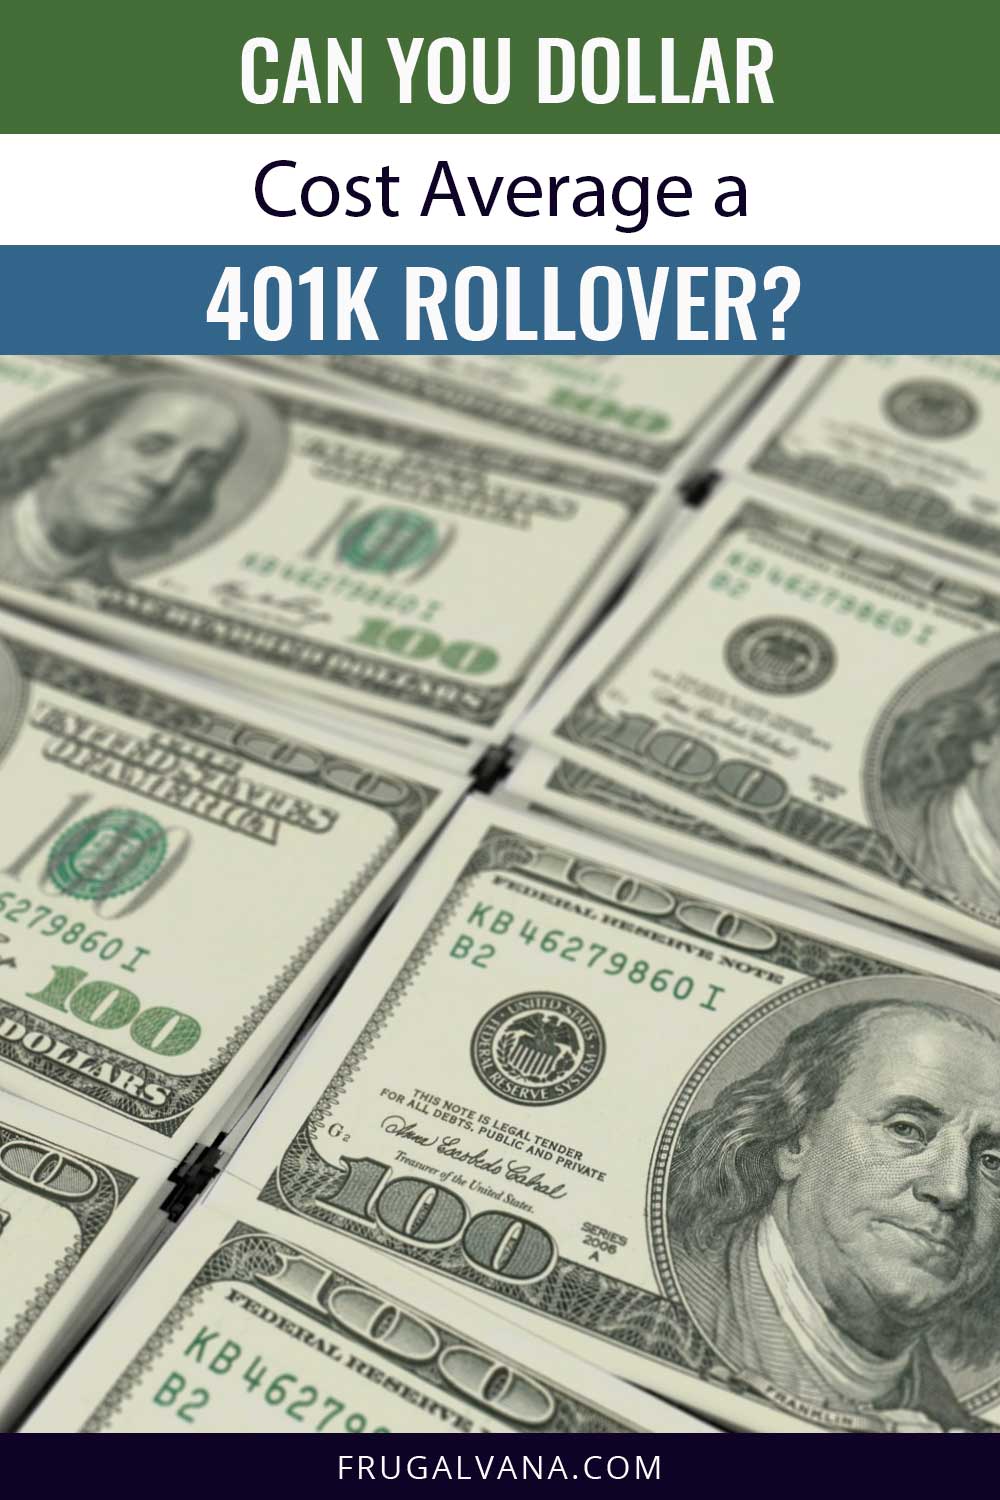 Can You Dollar Cost Average a 401k Rollover?